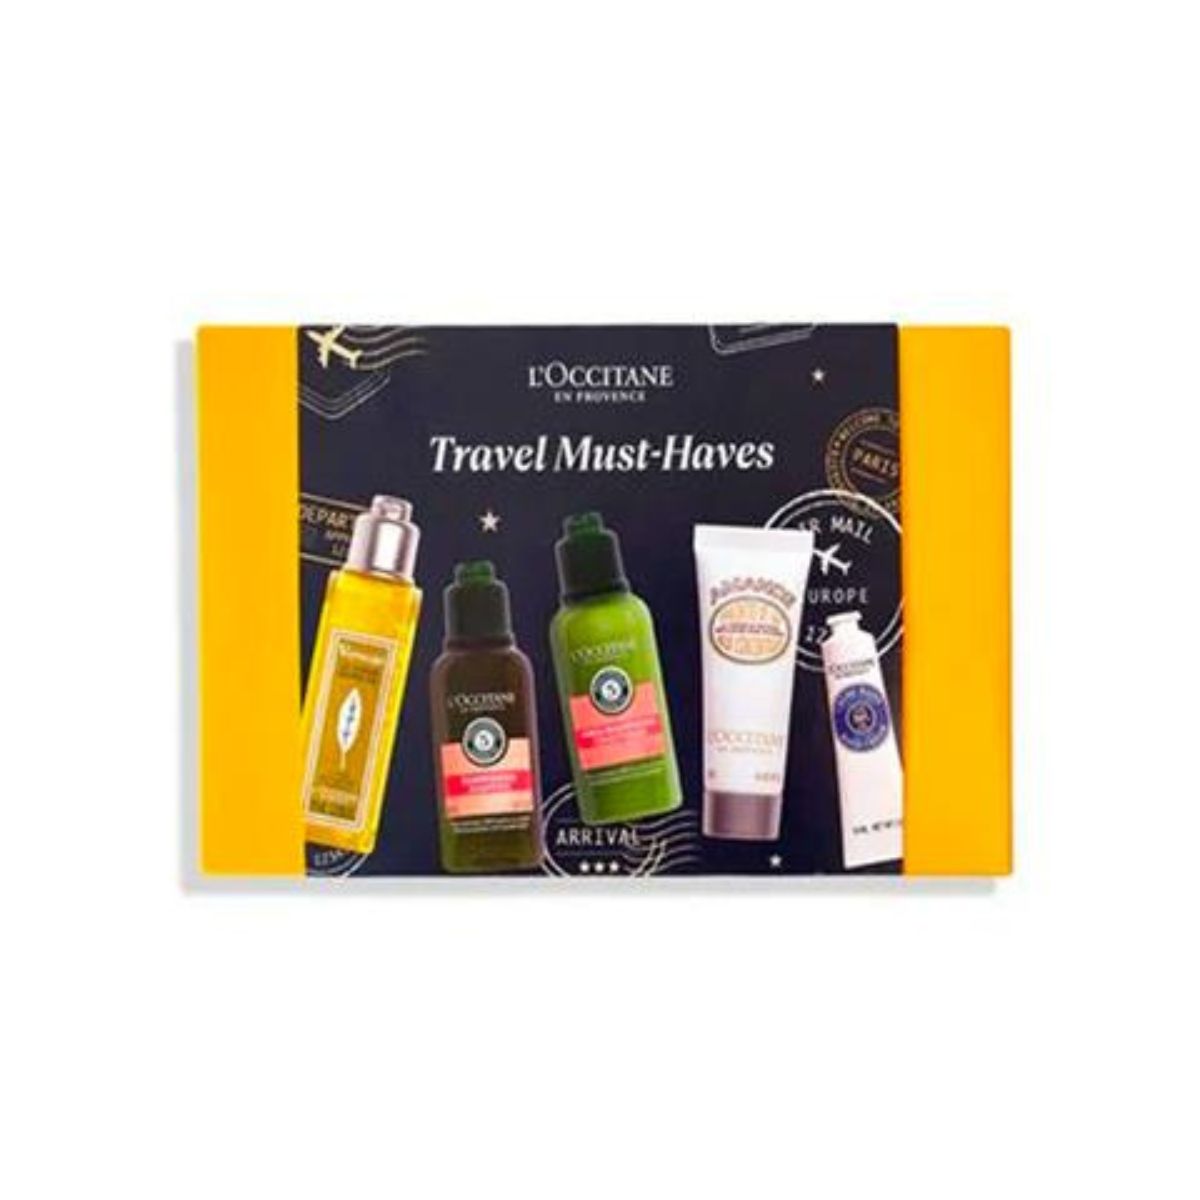 L'Occitane Travel Must Haves SAVE €6.50